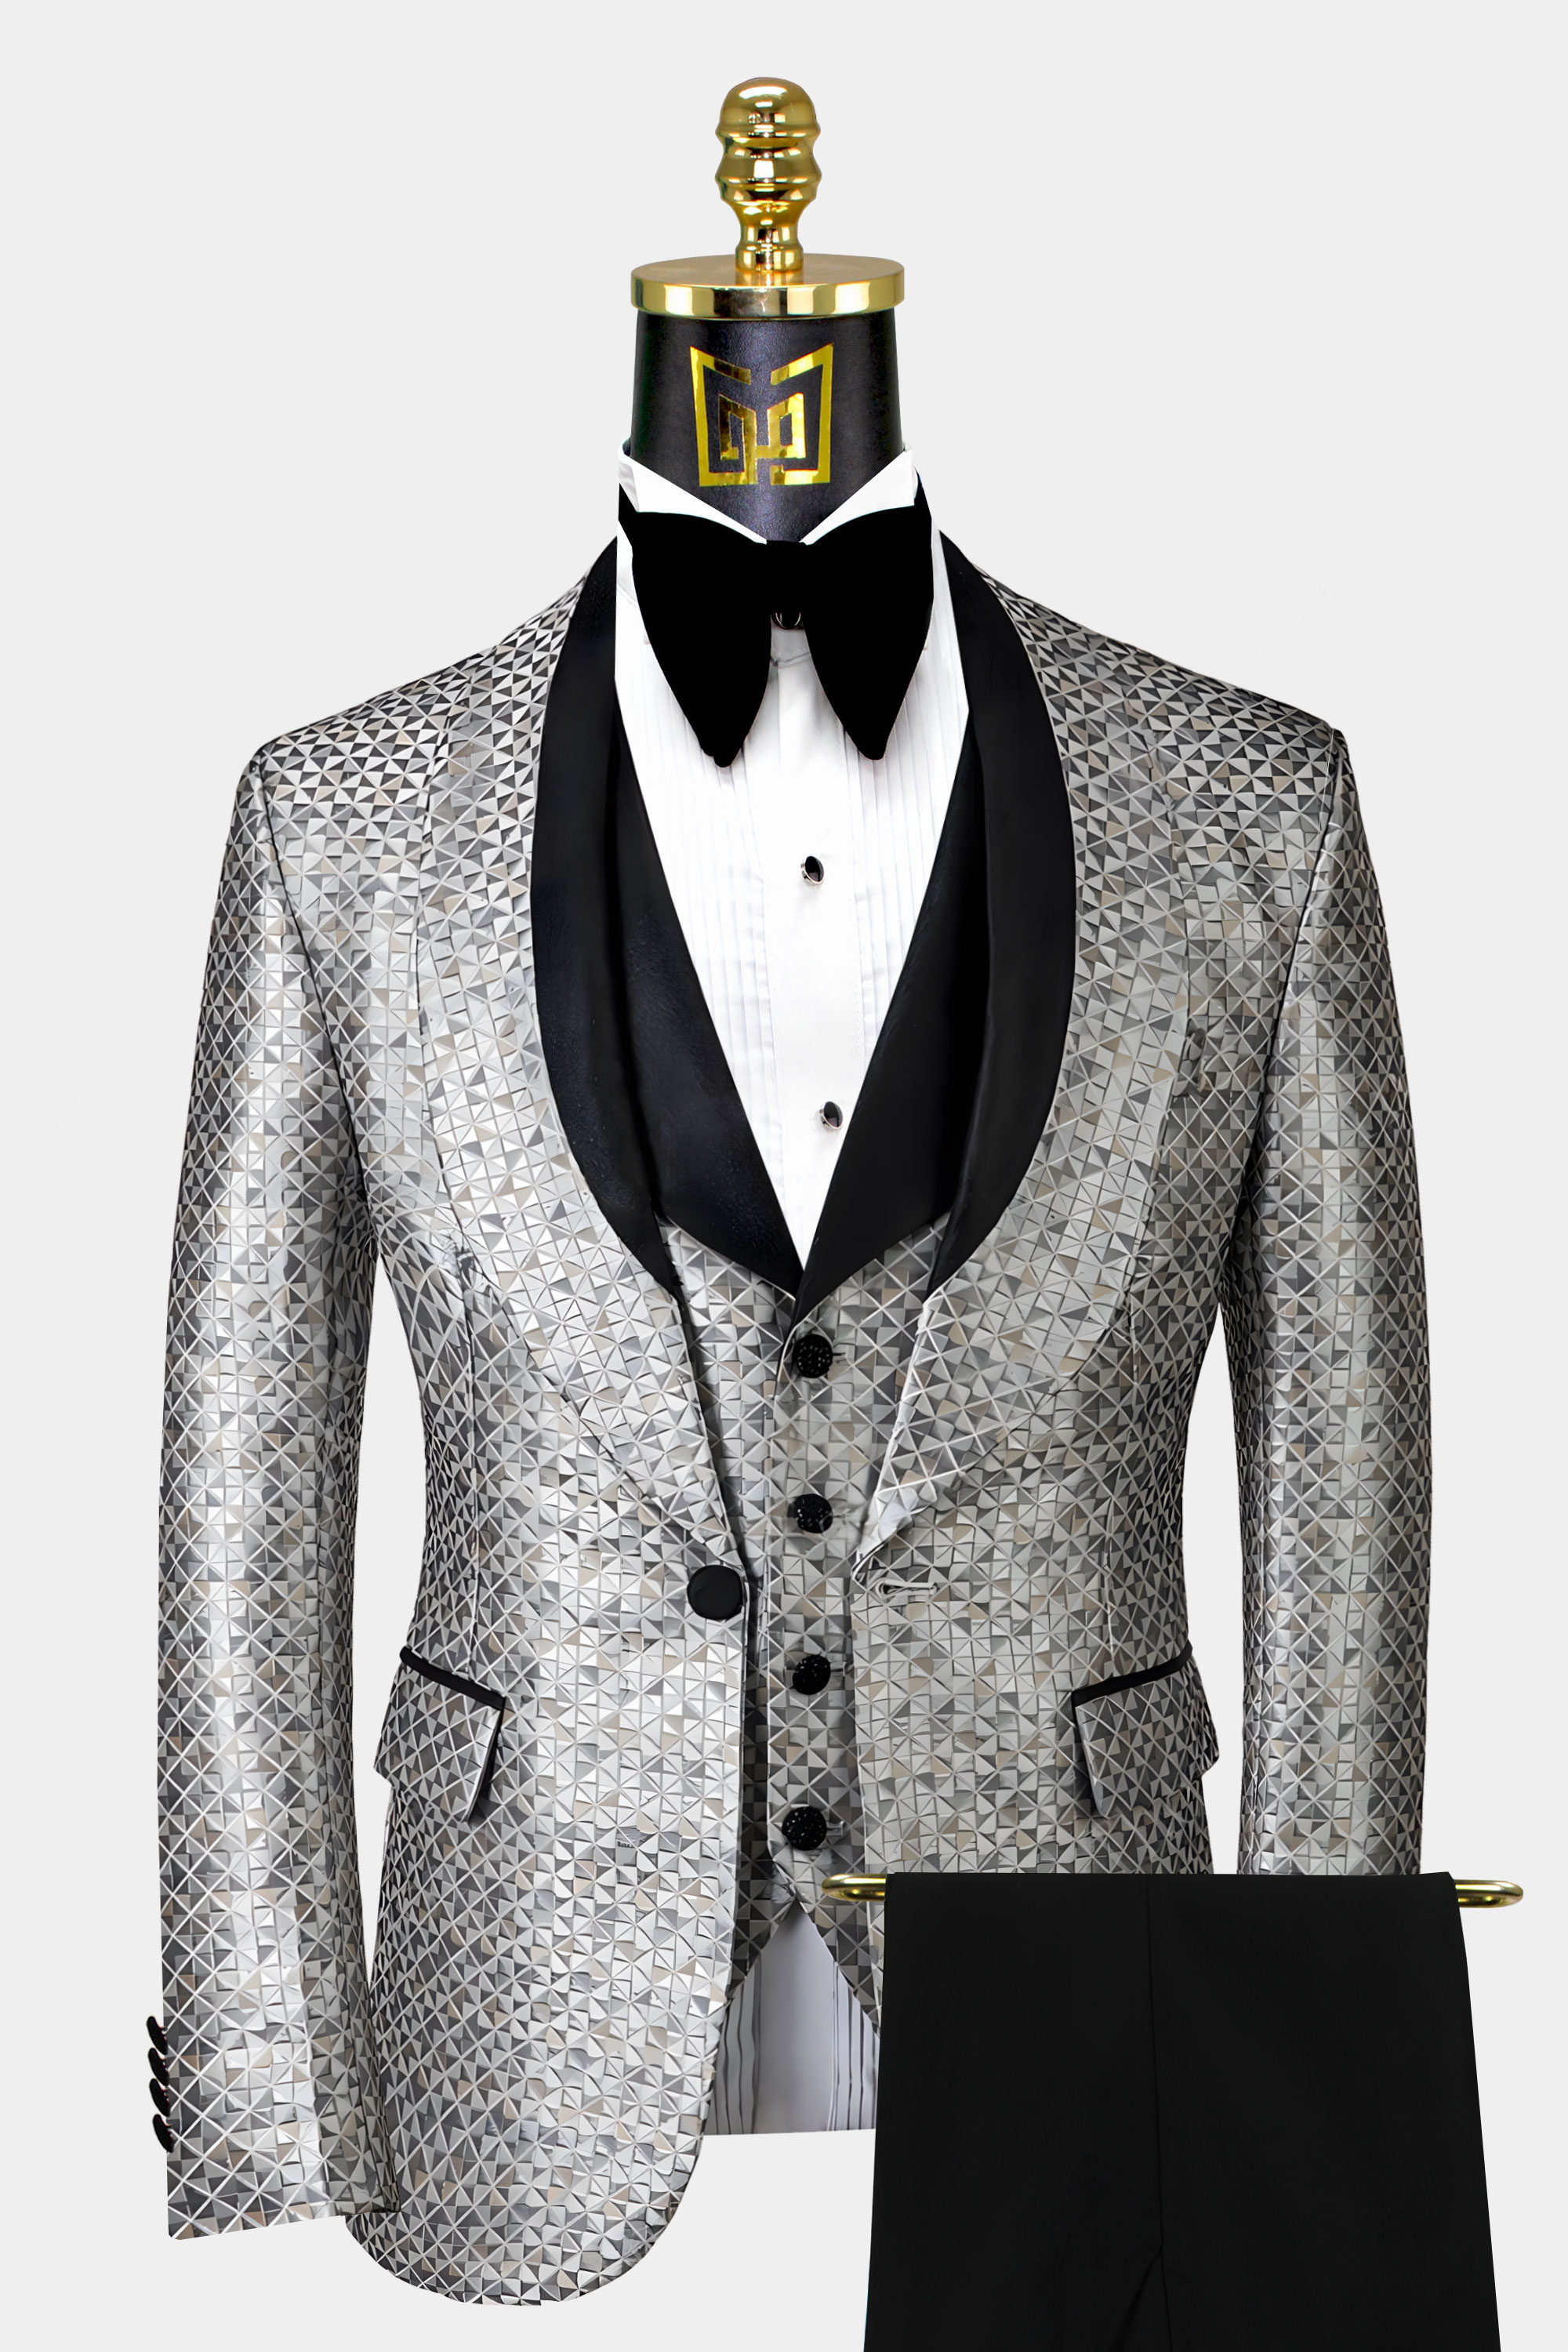 Silver Tuxedos For Weddings | peacecommission.kdsg.gov.ng